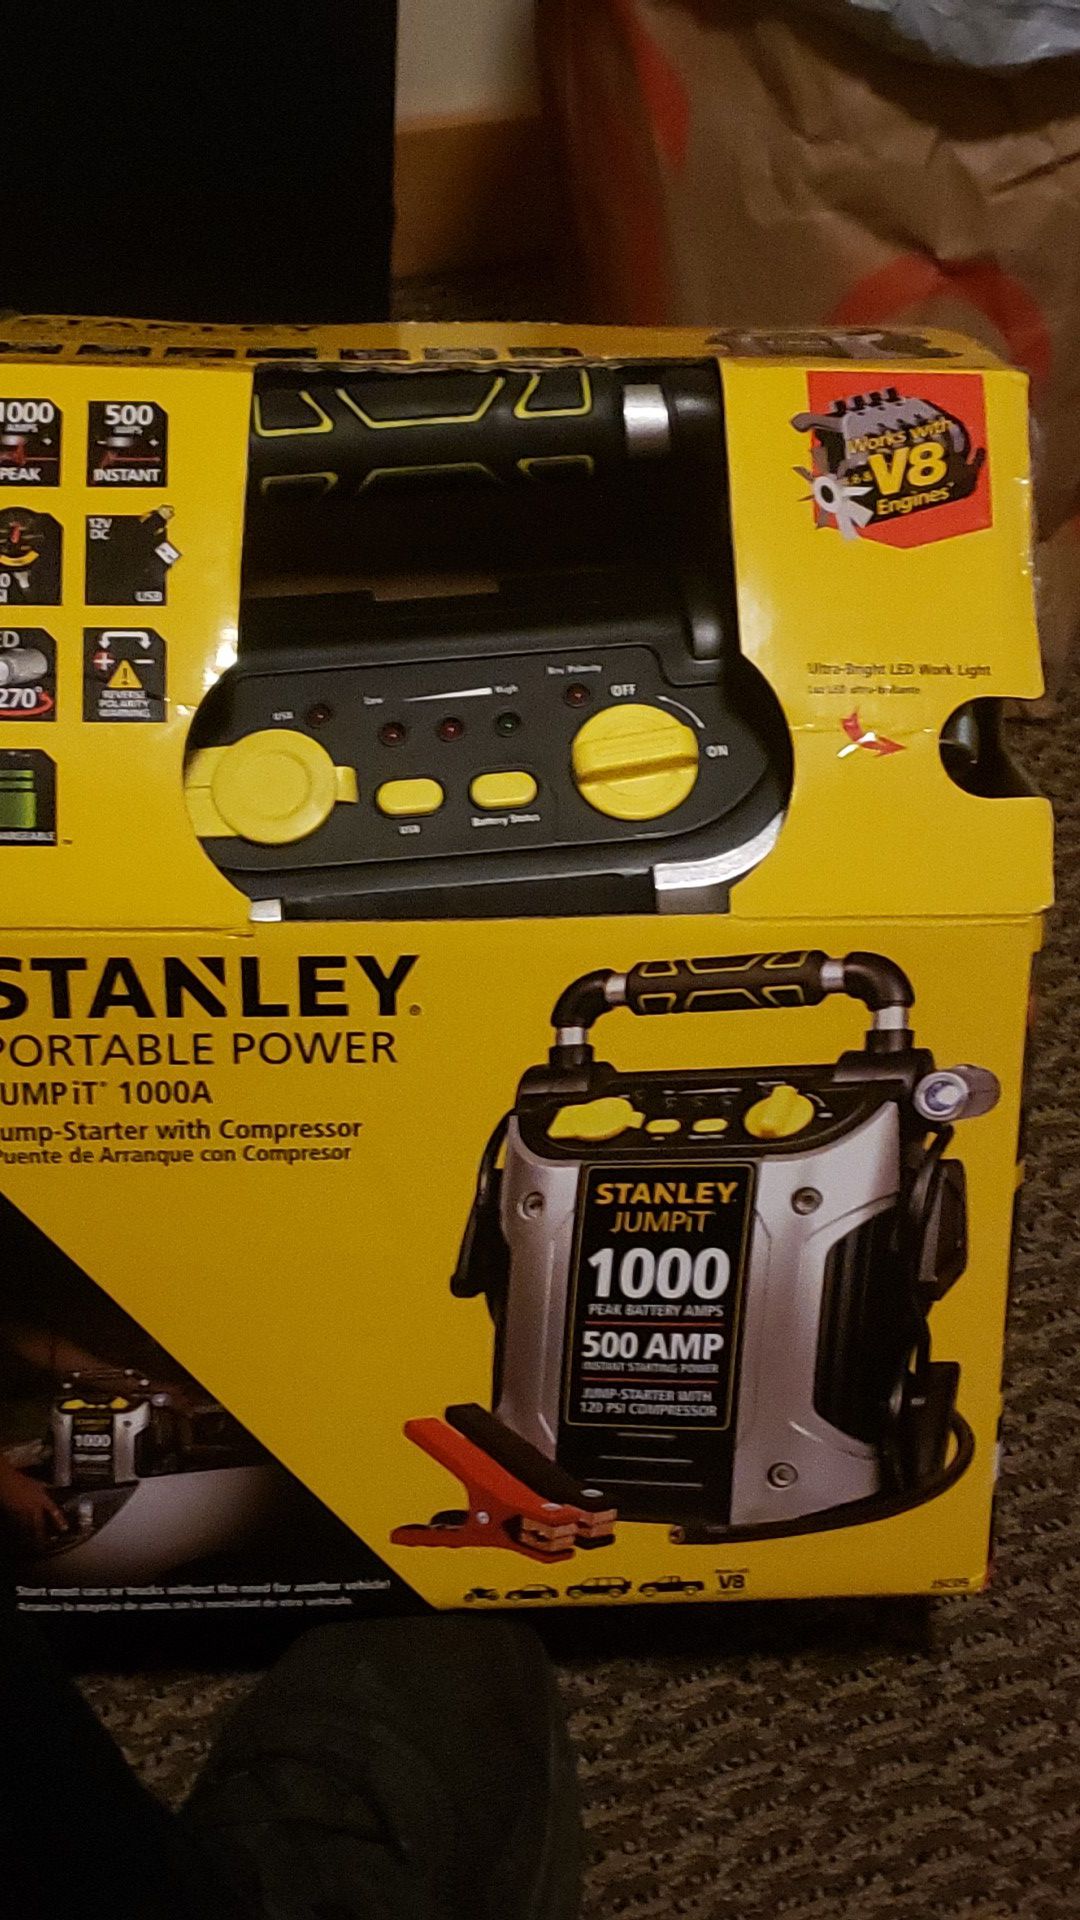 Stanley portable power 1000a jump box and compressor